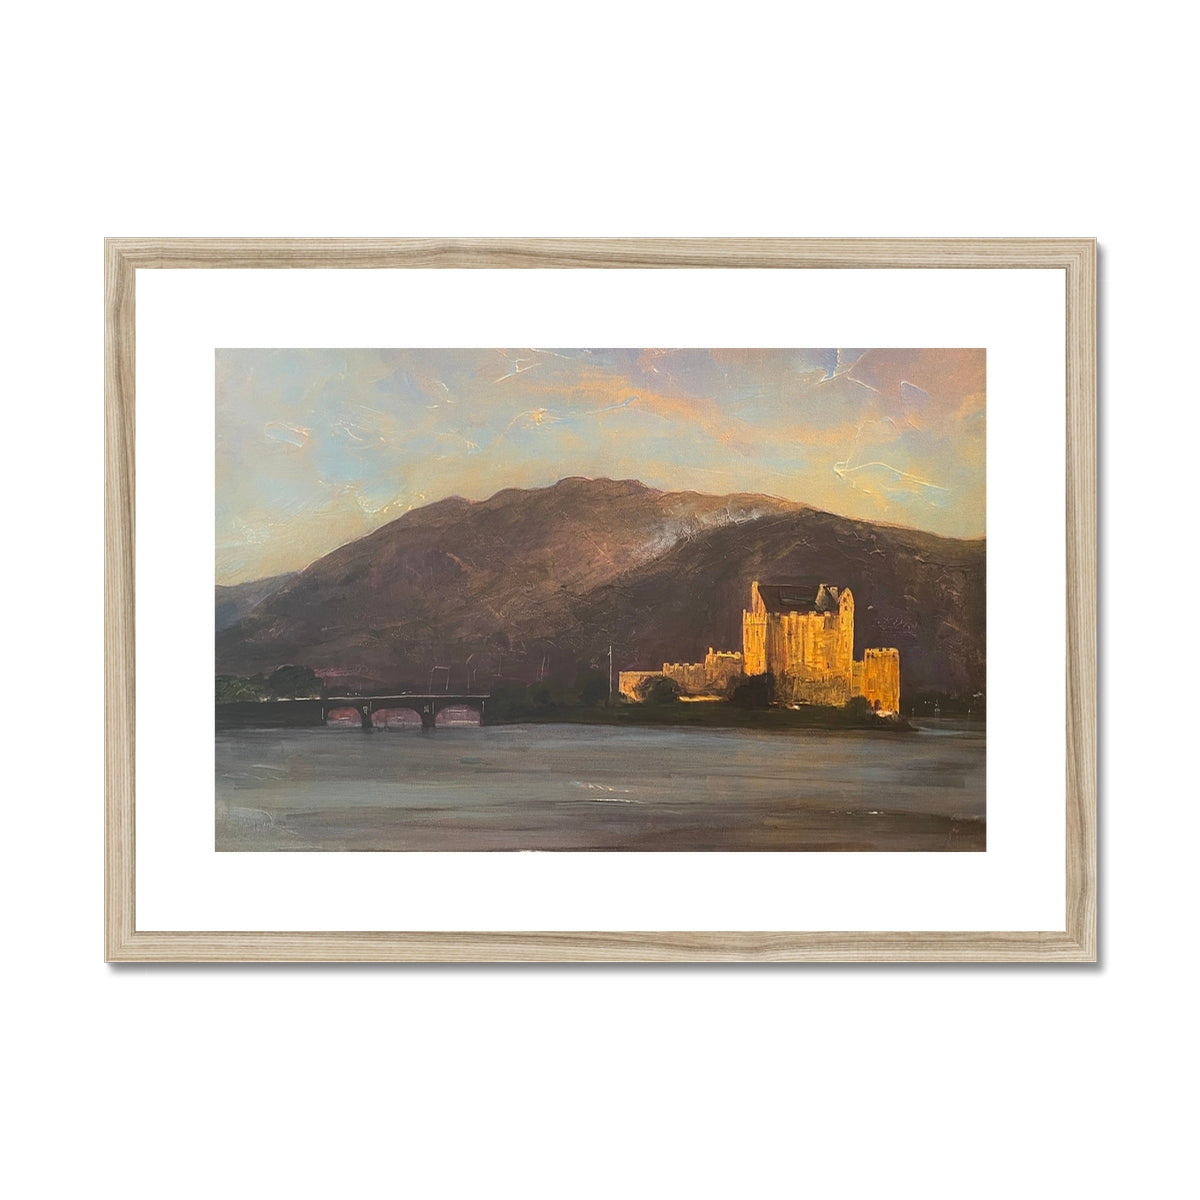 Eilean Donan Castle Painting | Framed & Mounted Prints From Scotland-Framed & Mounted Prints-Historic & Iconic Scotland Art Gallery-A2 Landscape-Natural Frame-Paintings, Prints, Homeware, Art Gifts From Scotland By Scottish Artist Kevin Hunter